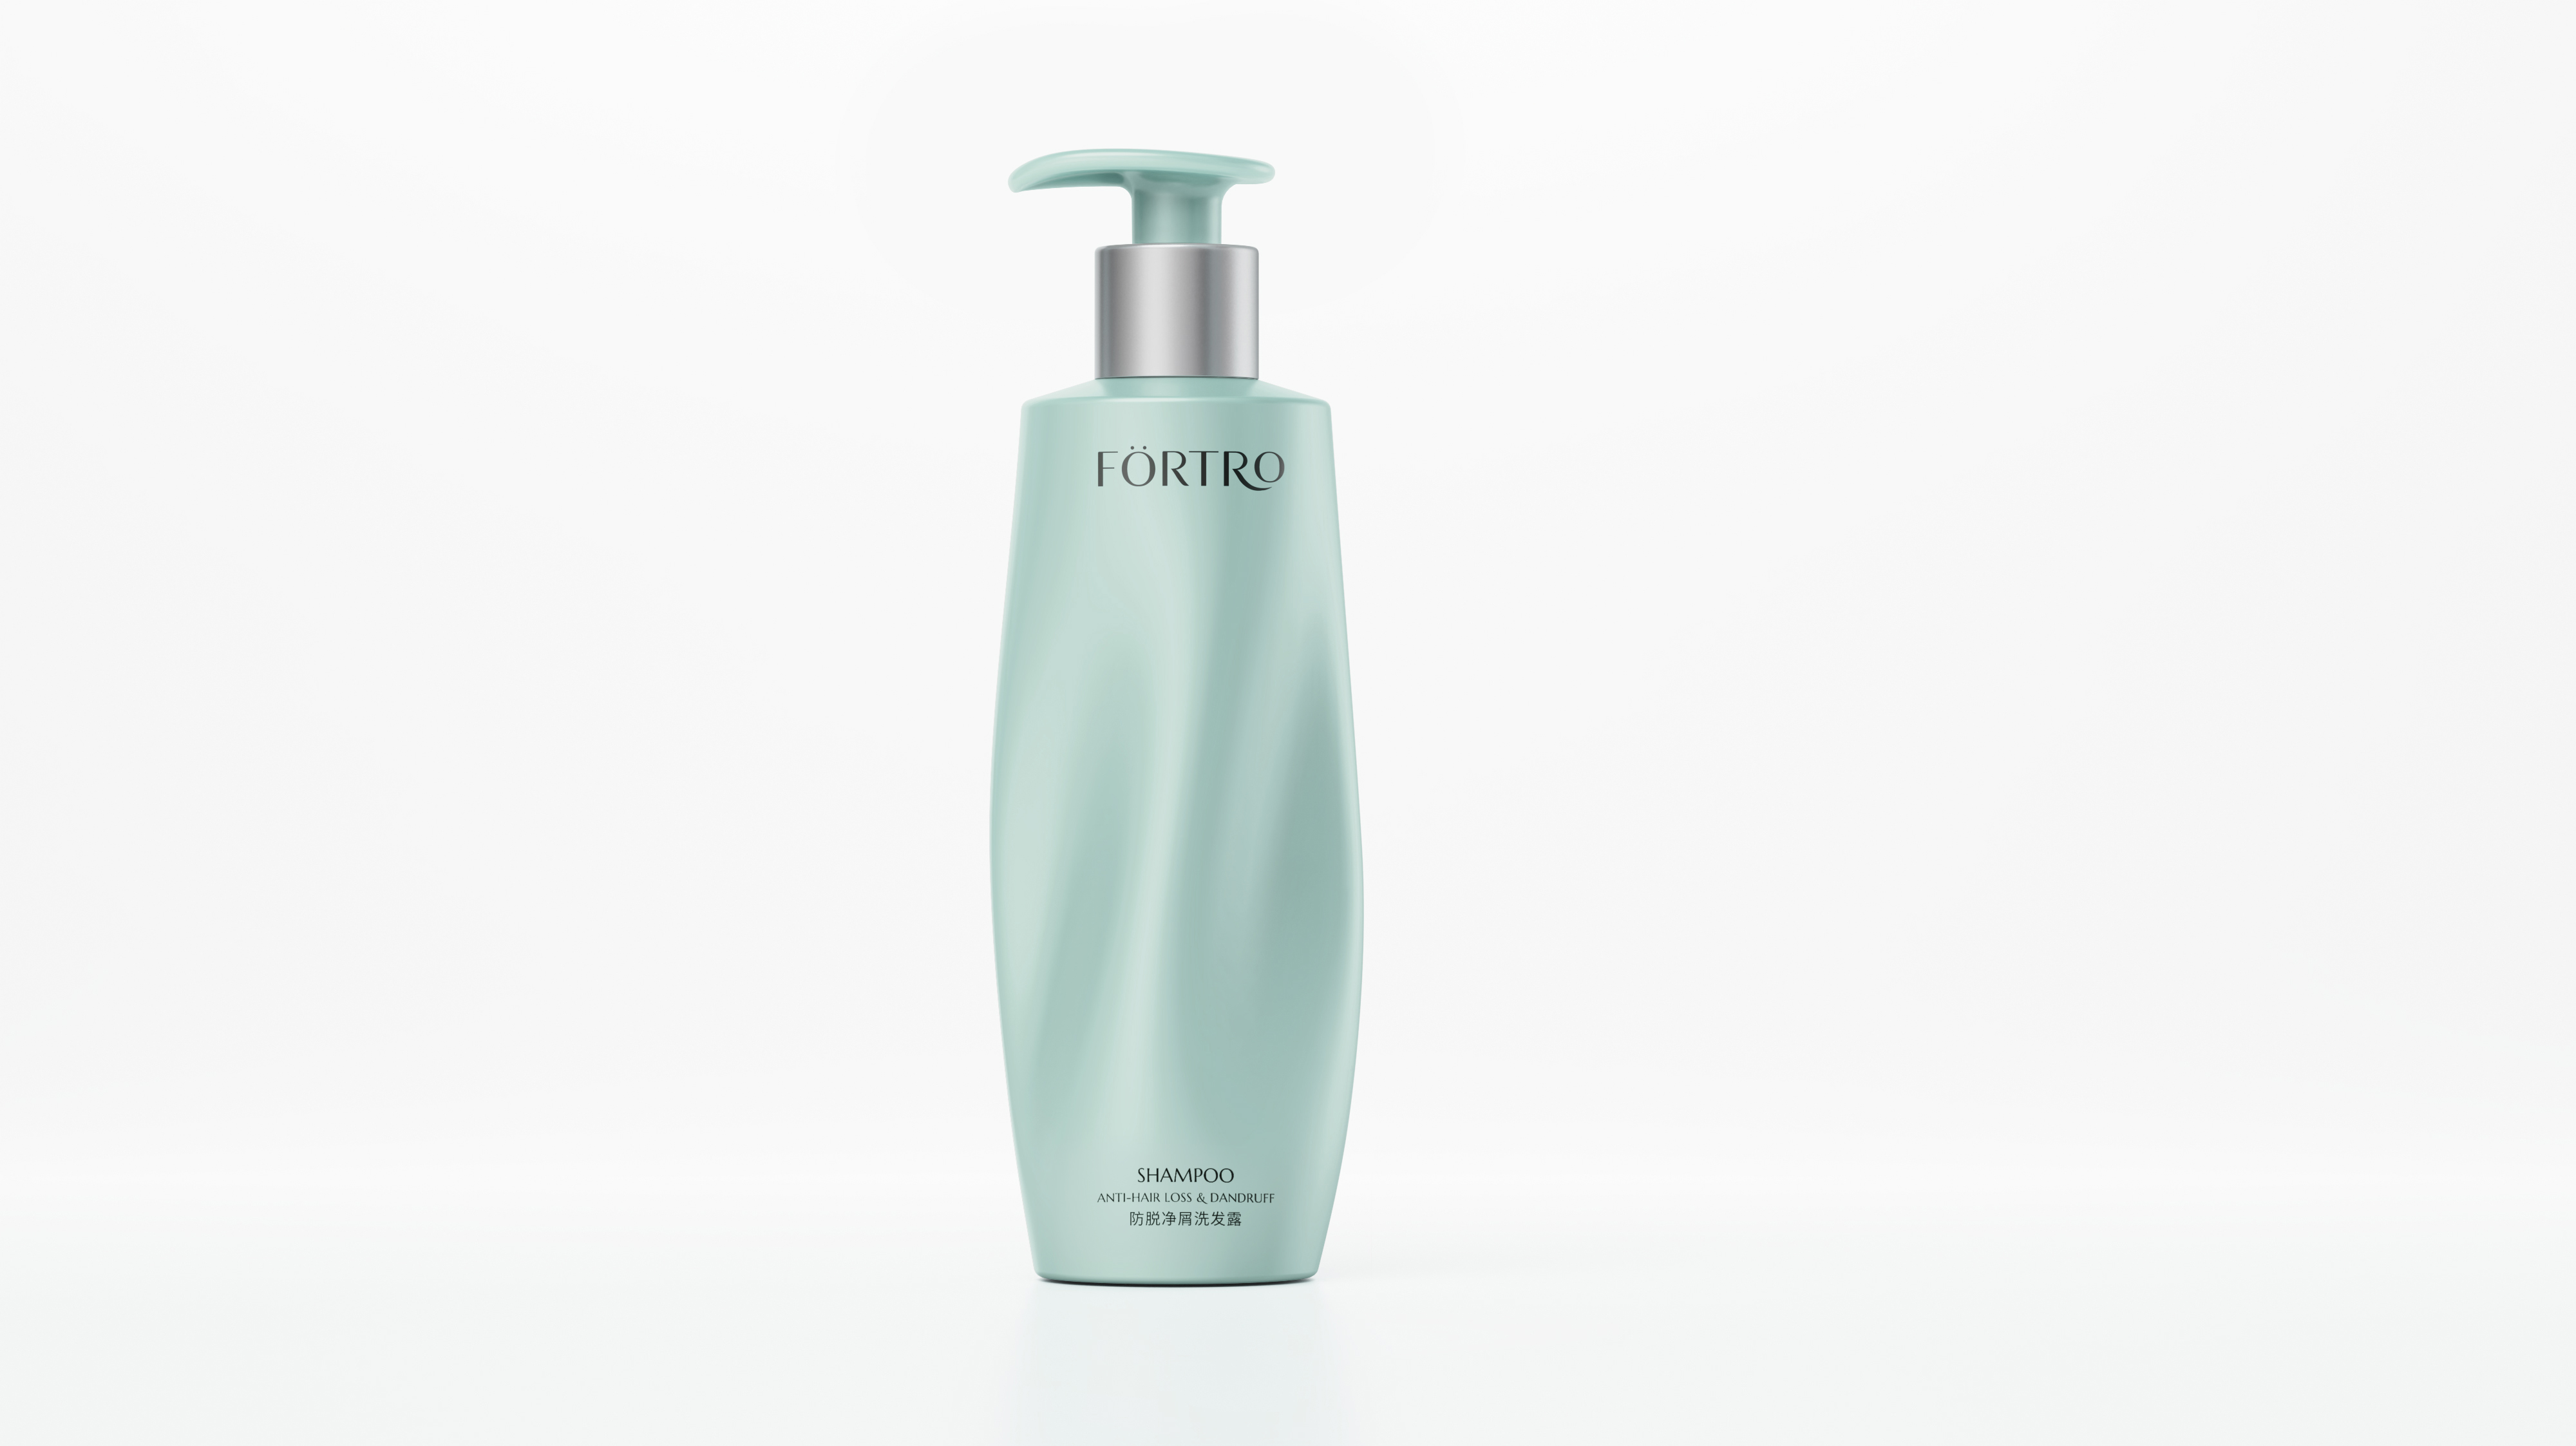 THE PACKAGING OF HUA AN TANG FORTRO SHAMPOO